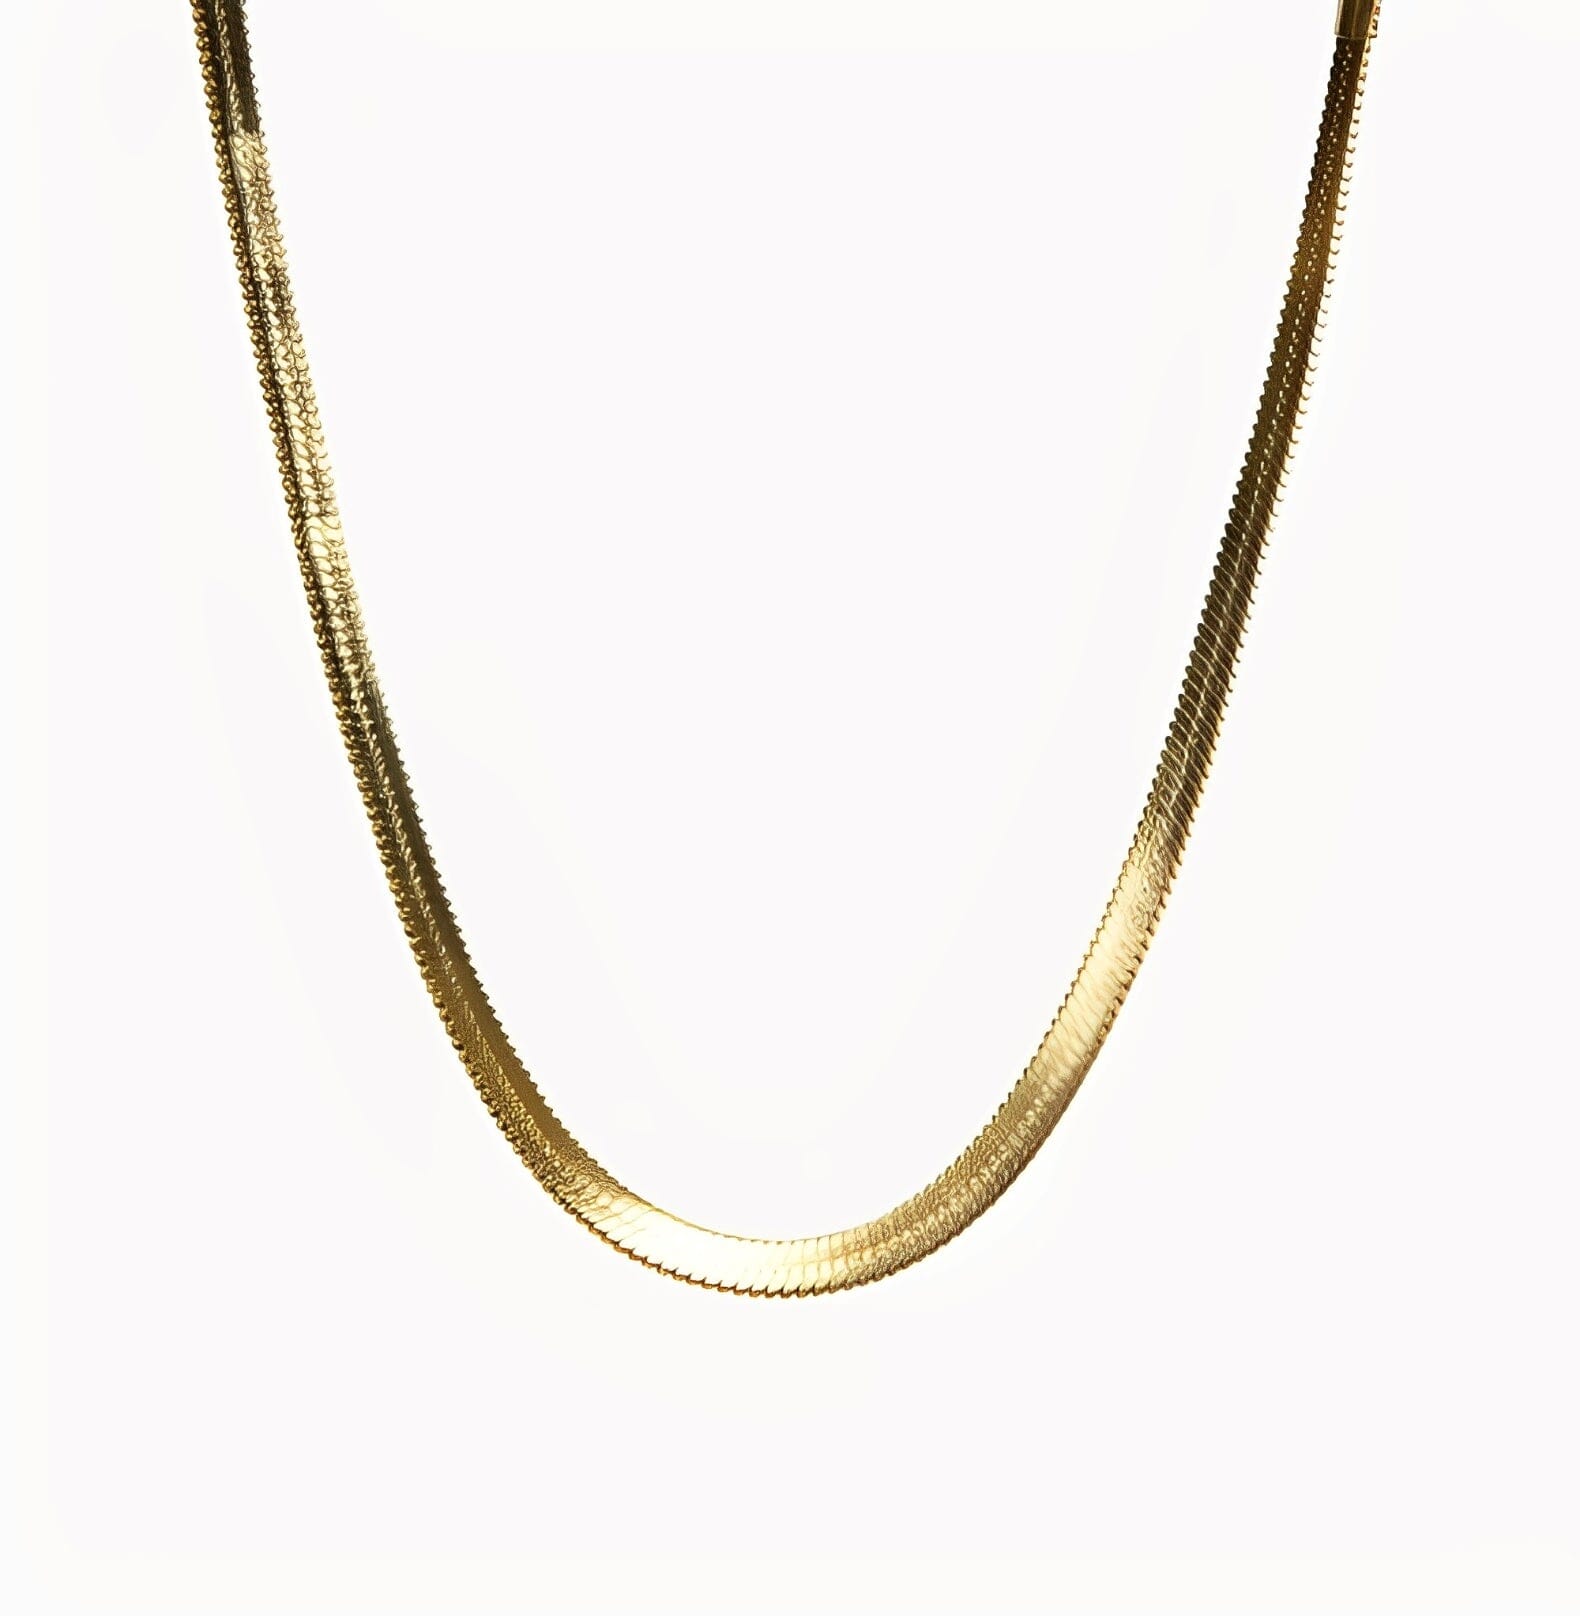 SNAKE NECKLACE - 4MM neck Yubama Jewelry Online Store - The Elegant Designs of Gold and Silver ! 